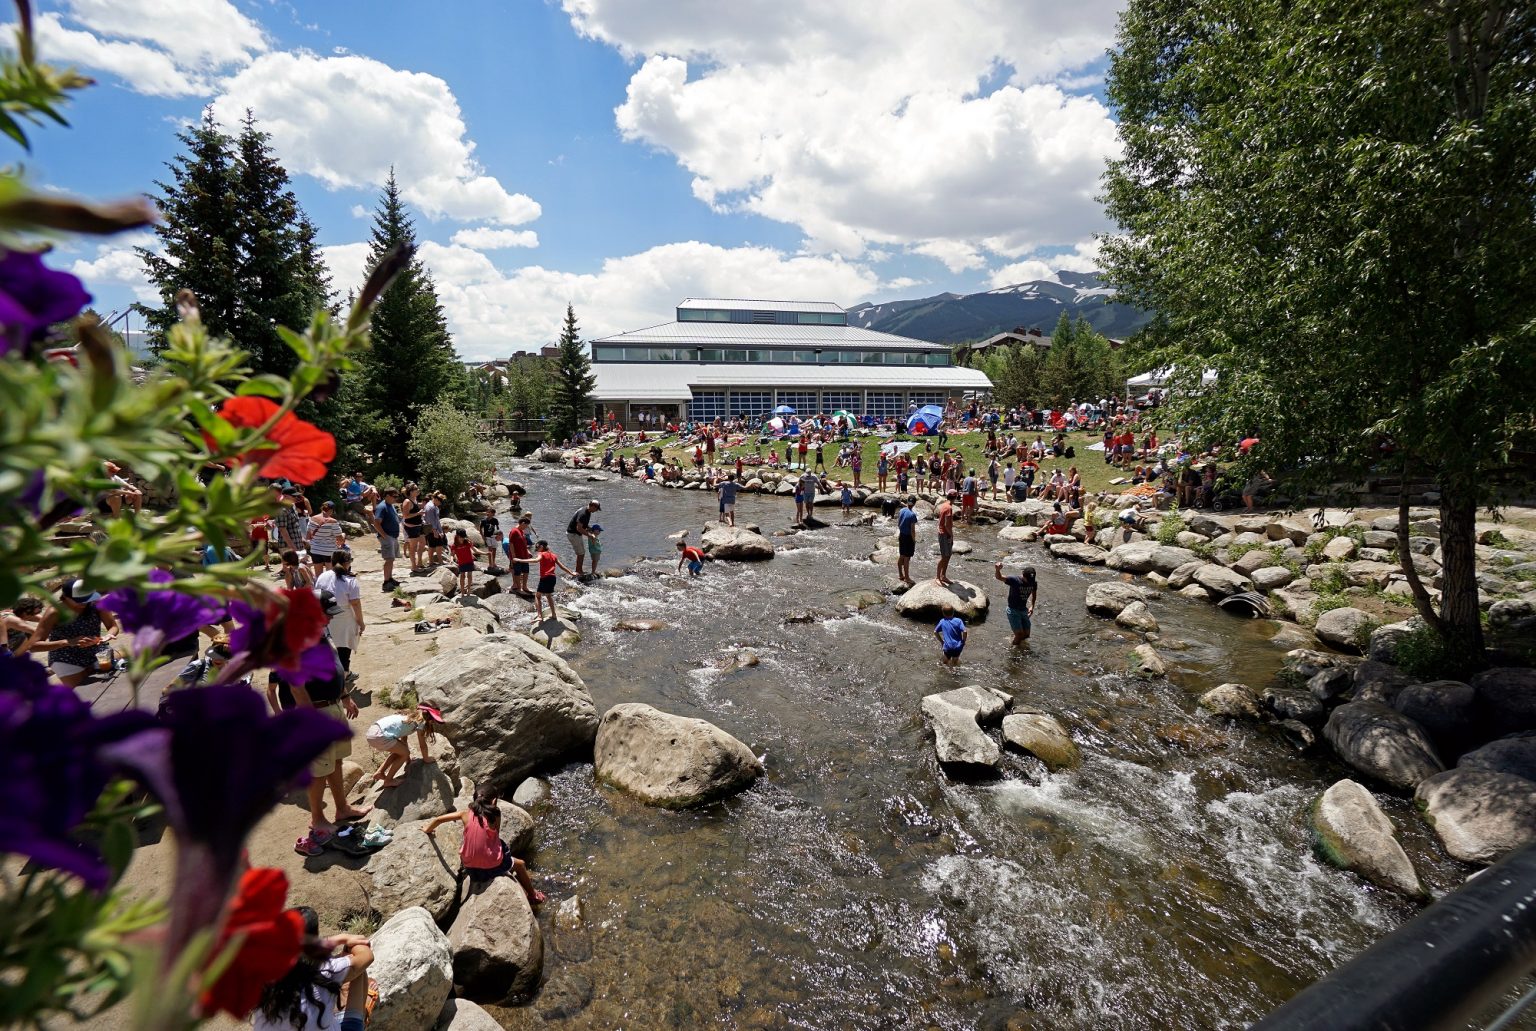 People in the river during 4th of July in Breckenridge